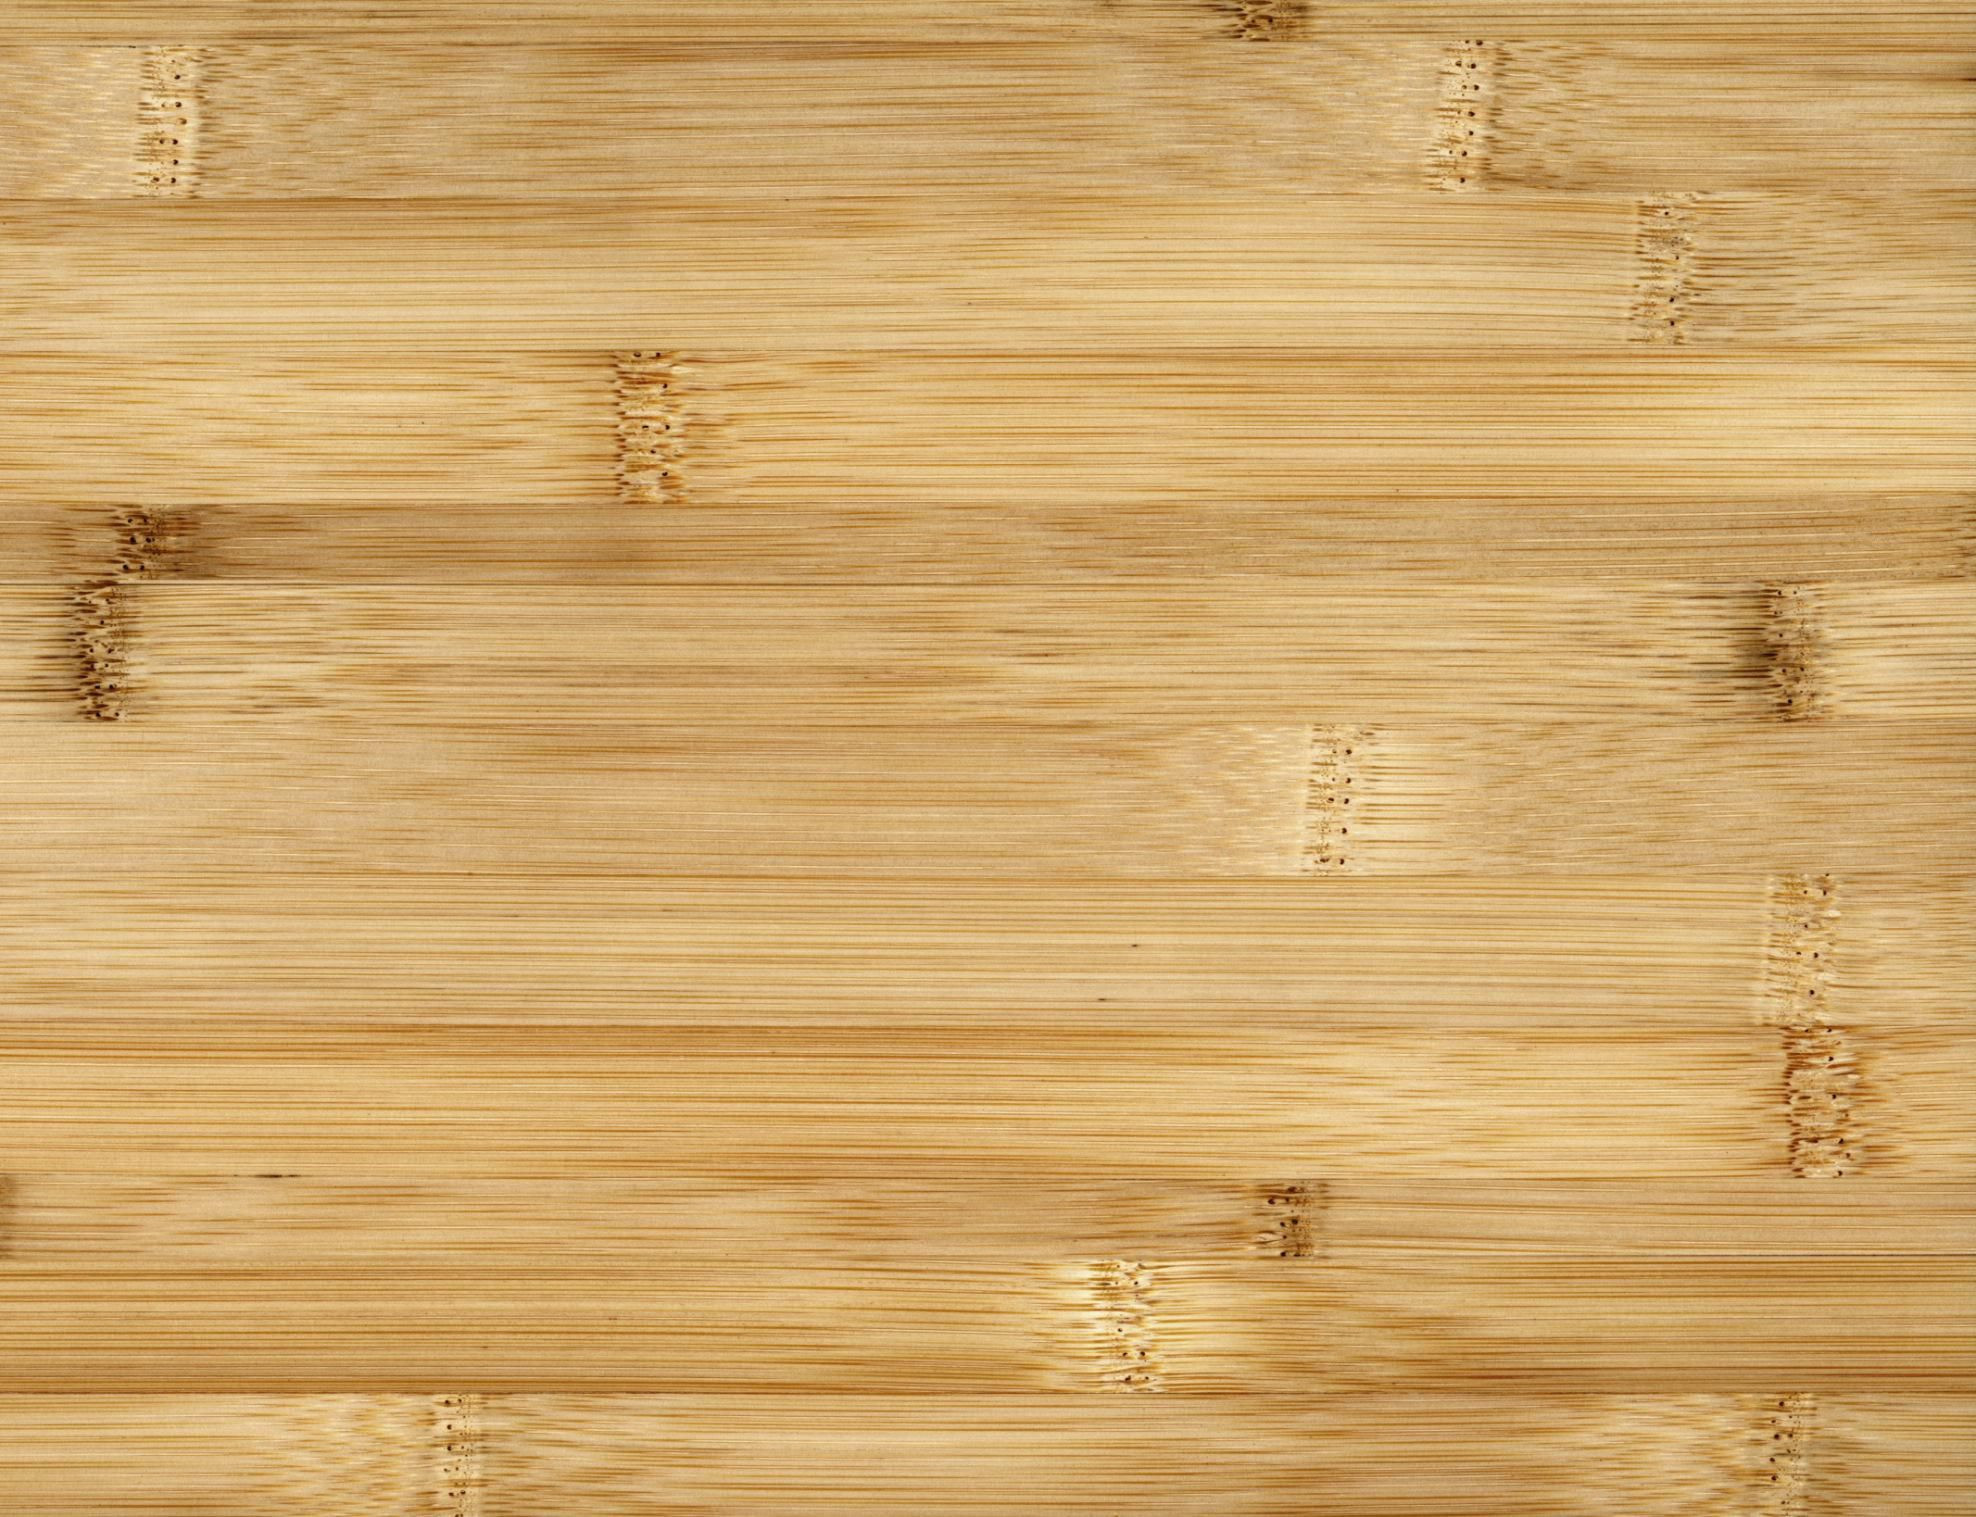 How to Tell What Hardwood Floor You Have Of How to Clean Bamboo Flooring In 200266305 001 56a2fd815f9b58b7d0d000cd